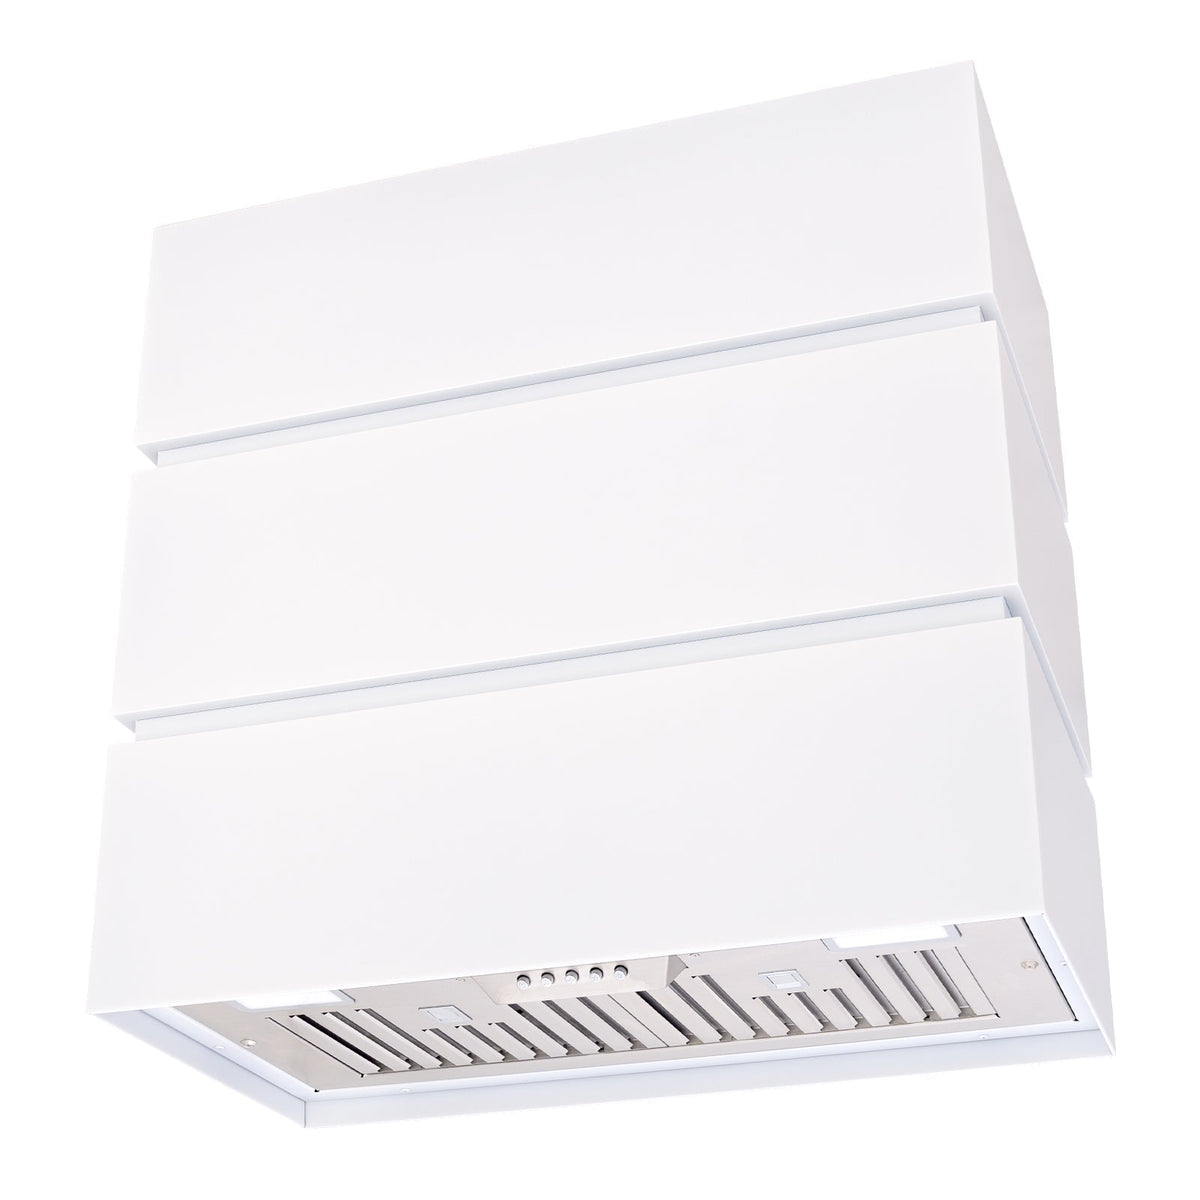 Akicon 30" Stainless Steel Range Hood, 3 Stacks Modern Box Kitchen Hood with Powerful Vent Motor, Wall Mount, 30”W*30”H*14"D, Signal White